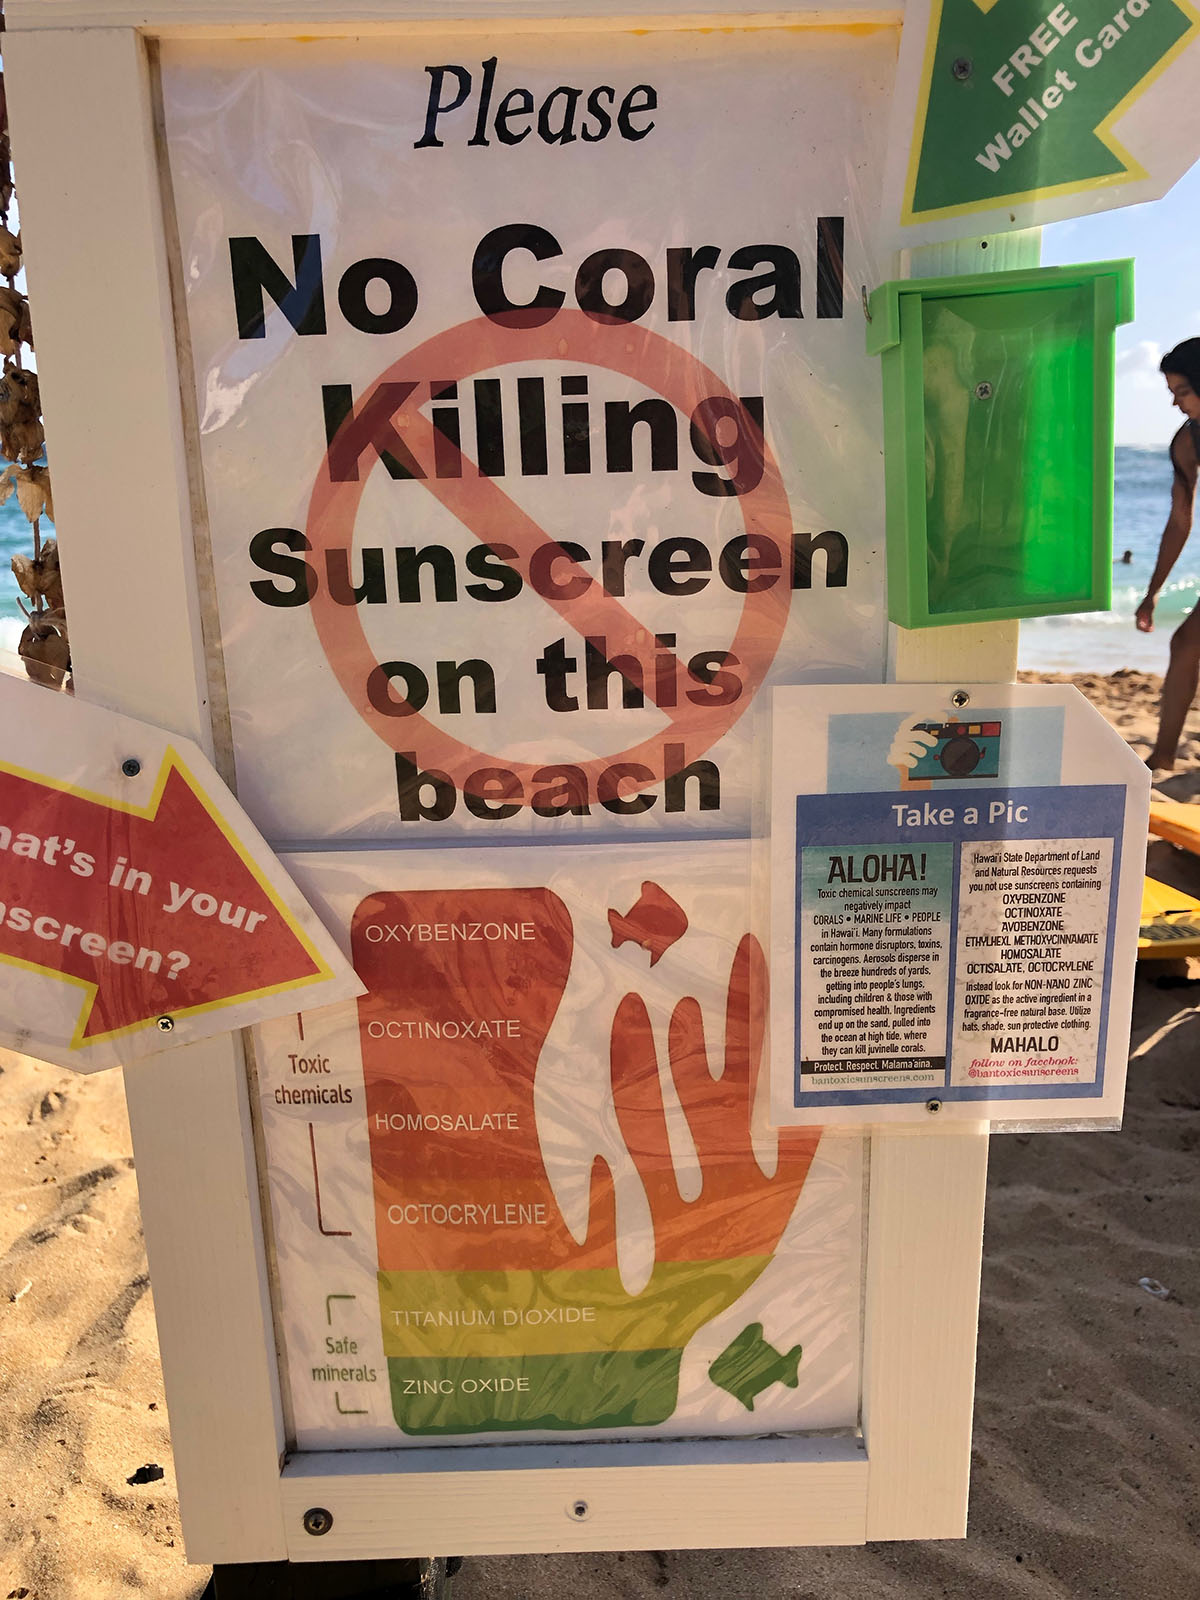 Reef Safe Sunscreen Guide